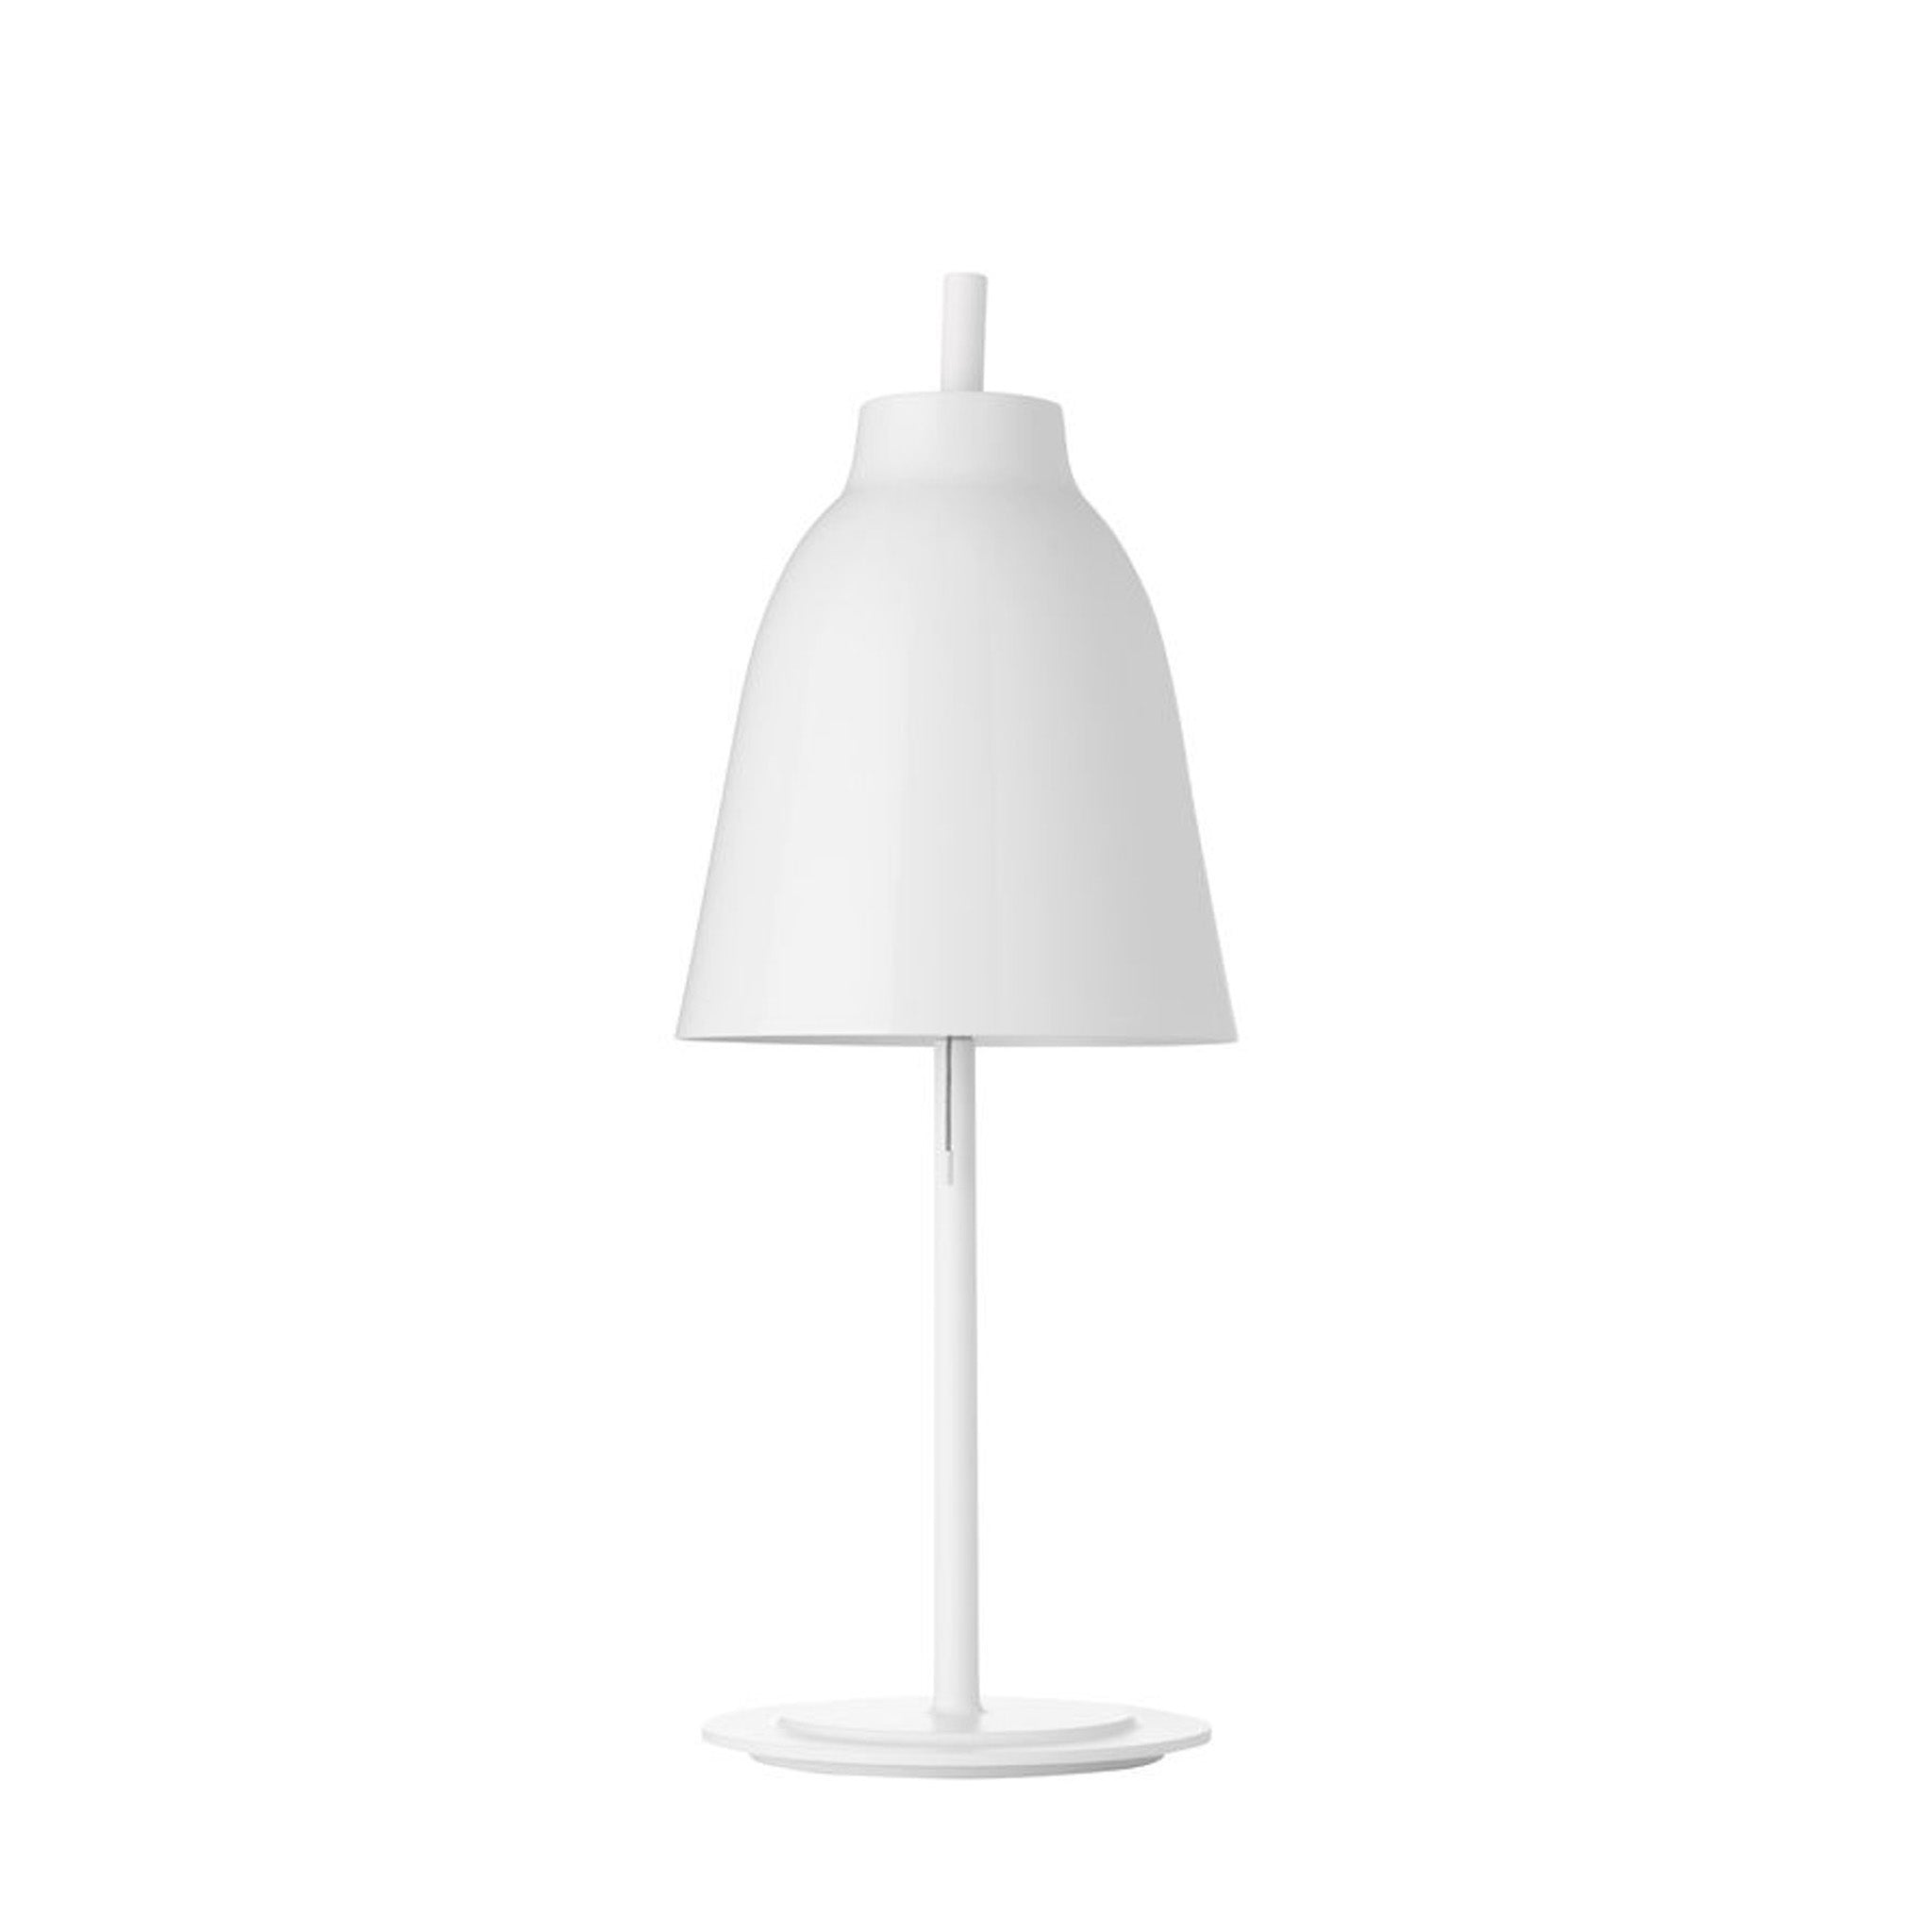 Clearance Caravaggio Table Light / White by Fritz Hansen